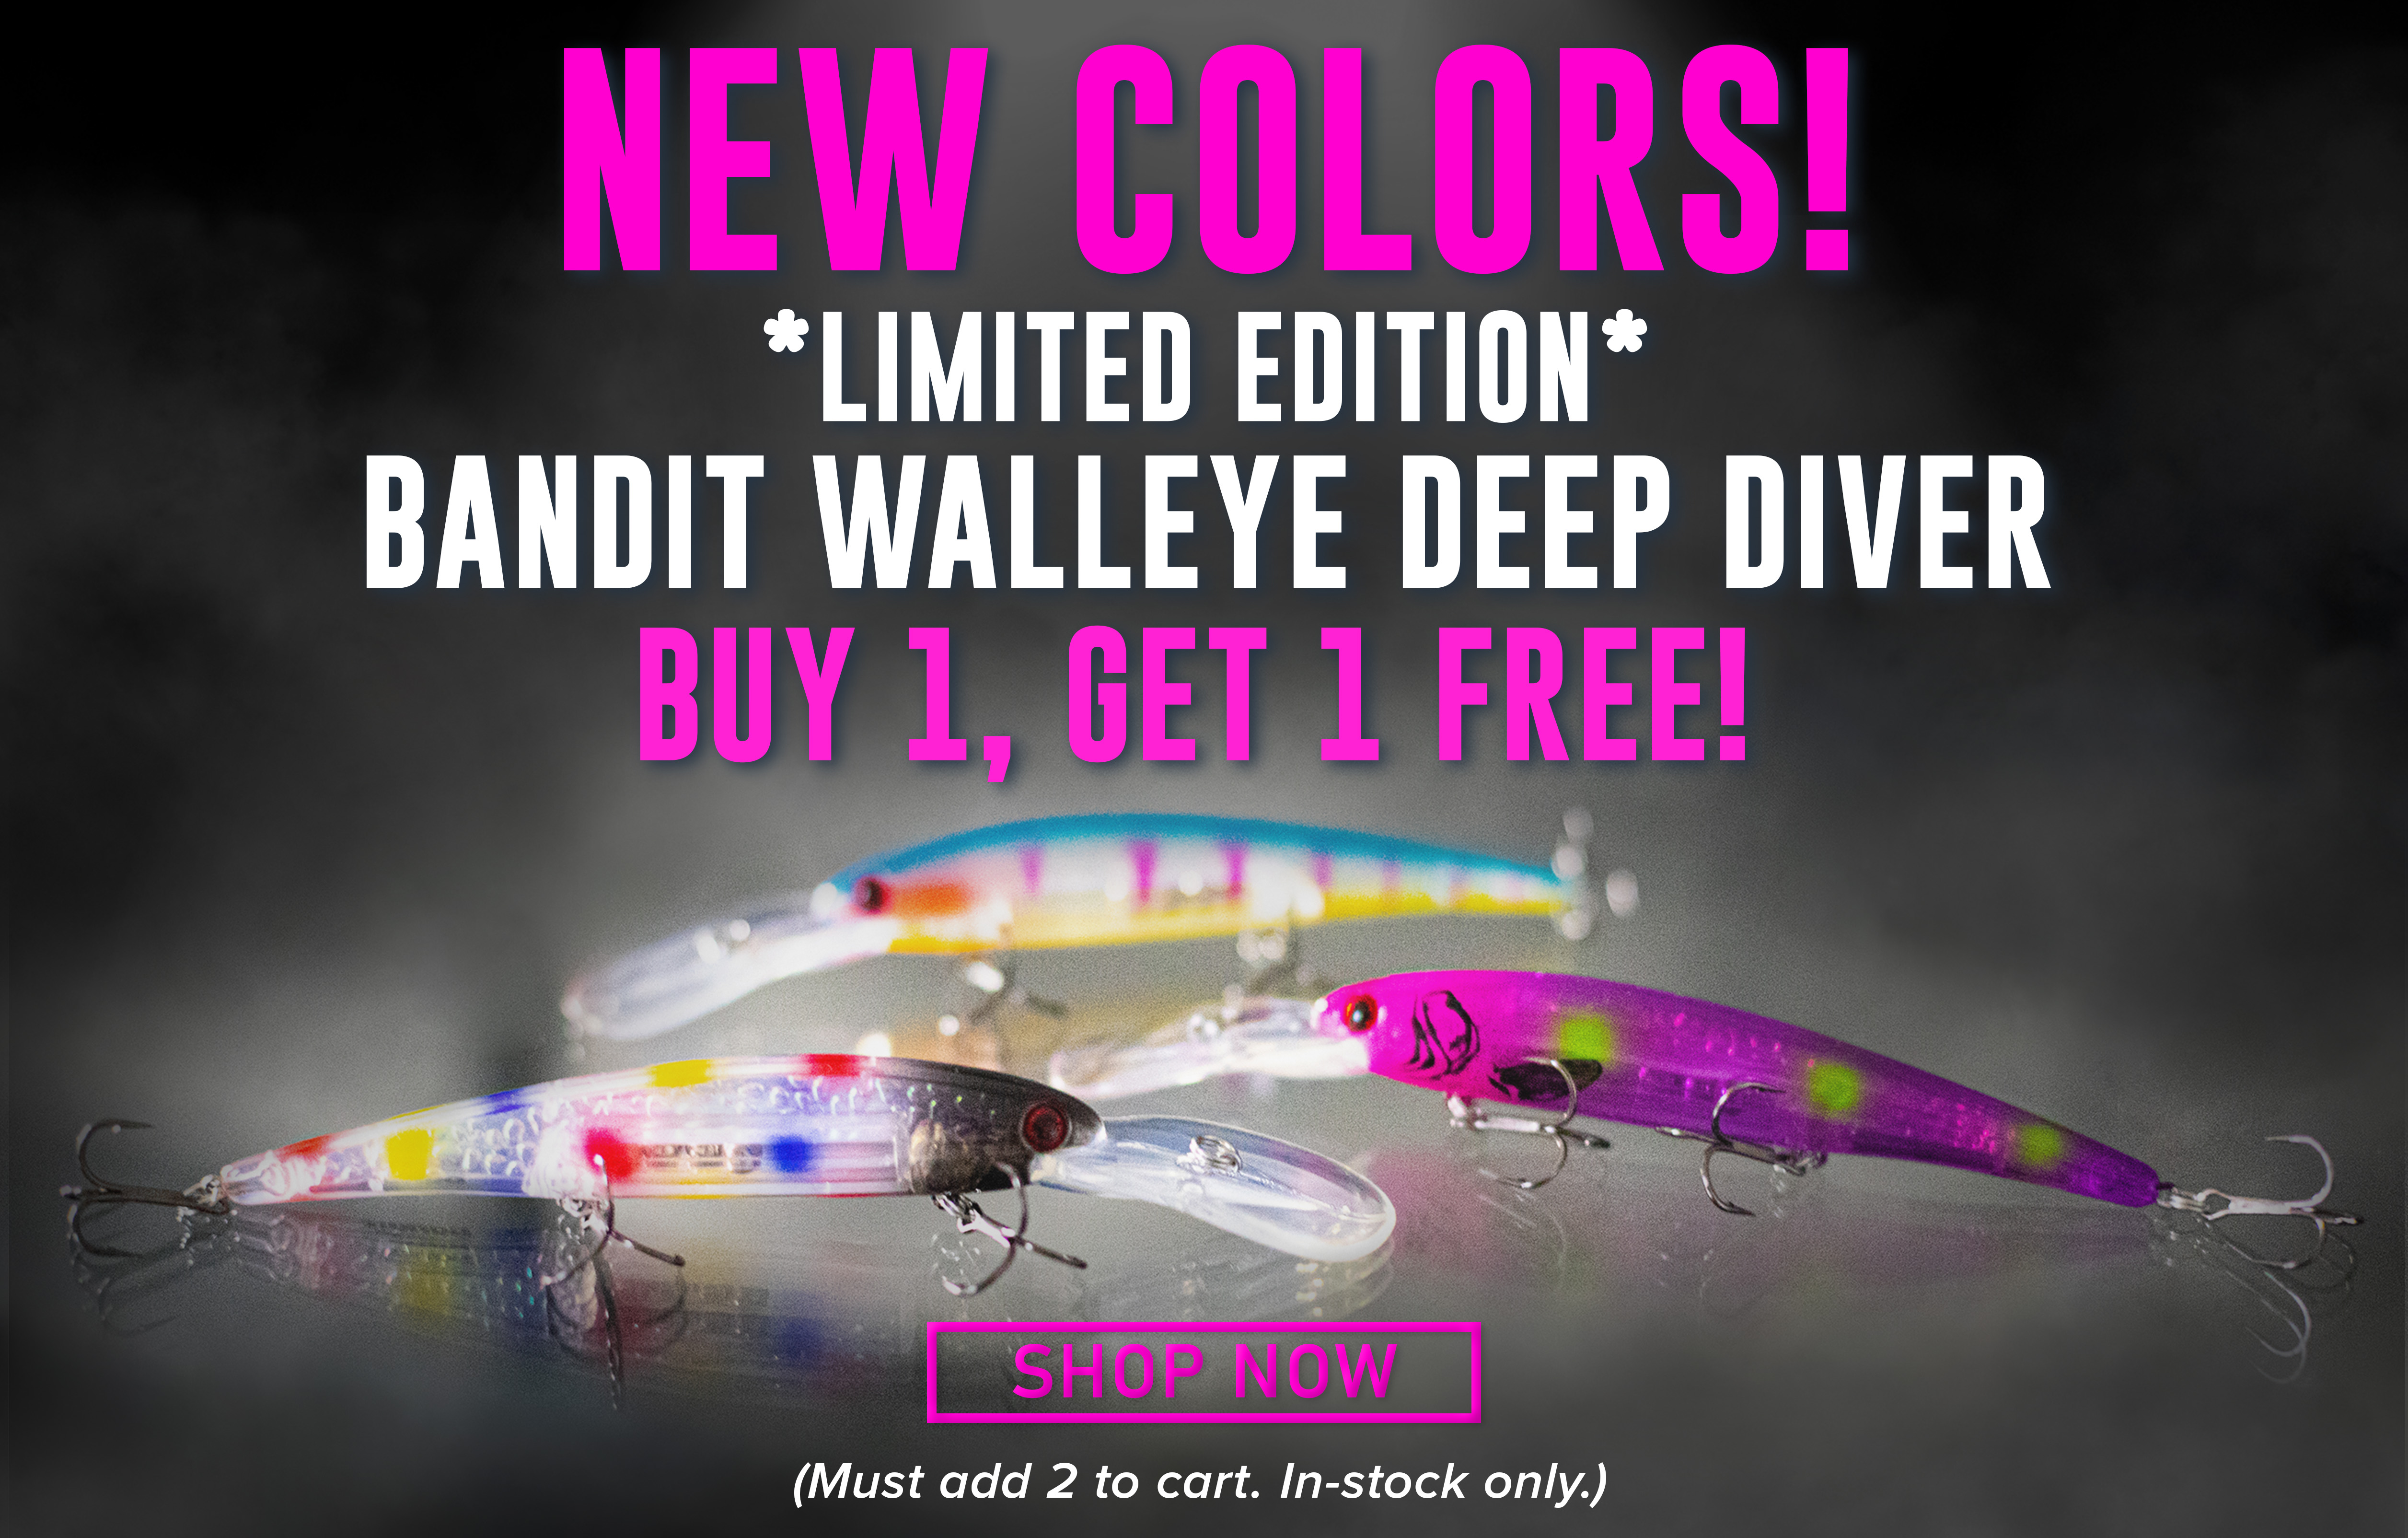 Buy 1, Get 1 Free Bandit Walleye Deep Diver Limited Edition! NEW